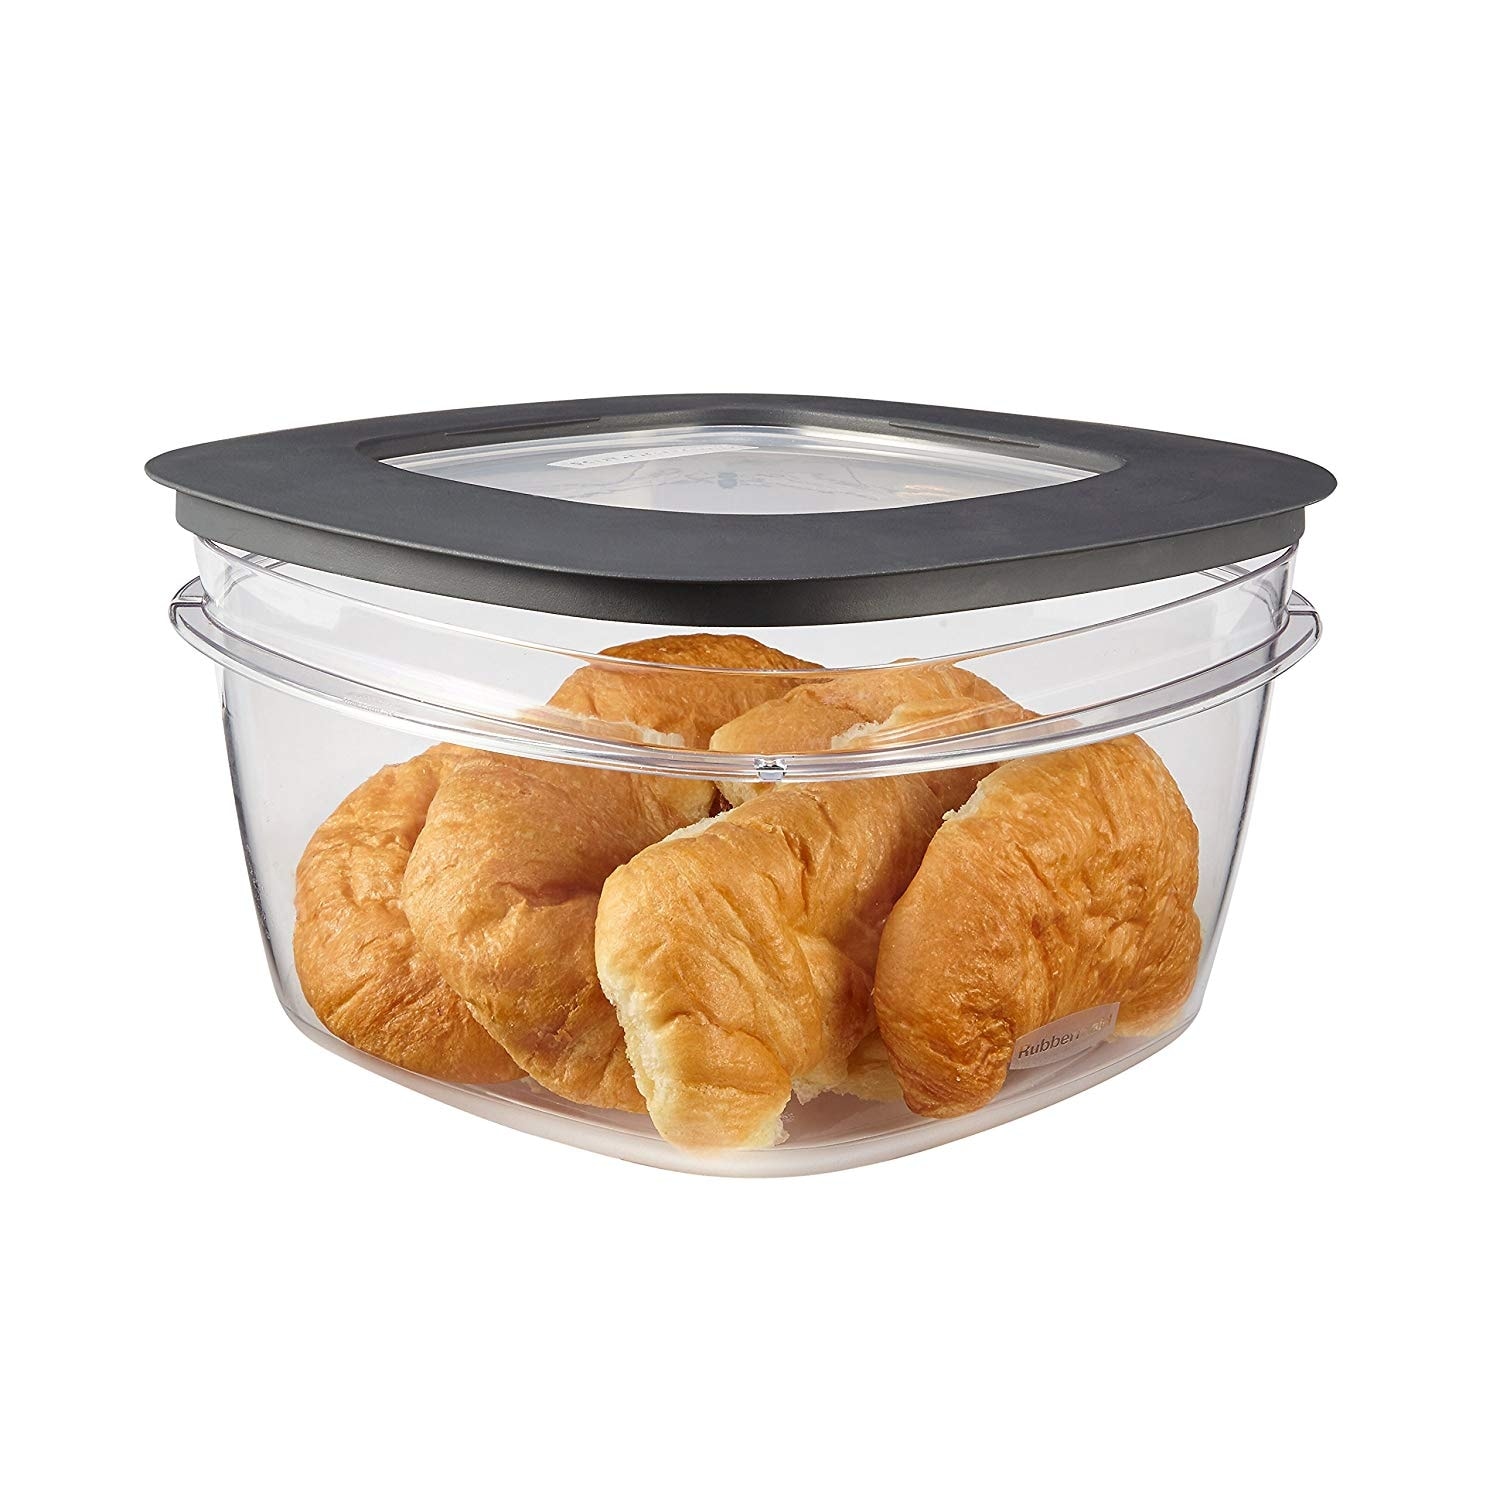 Rubbermaid 1937693 Premier Stain Shield Food Storage Container, 14